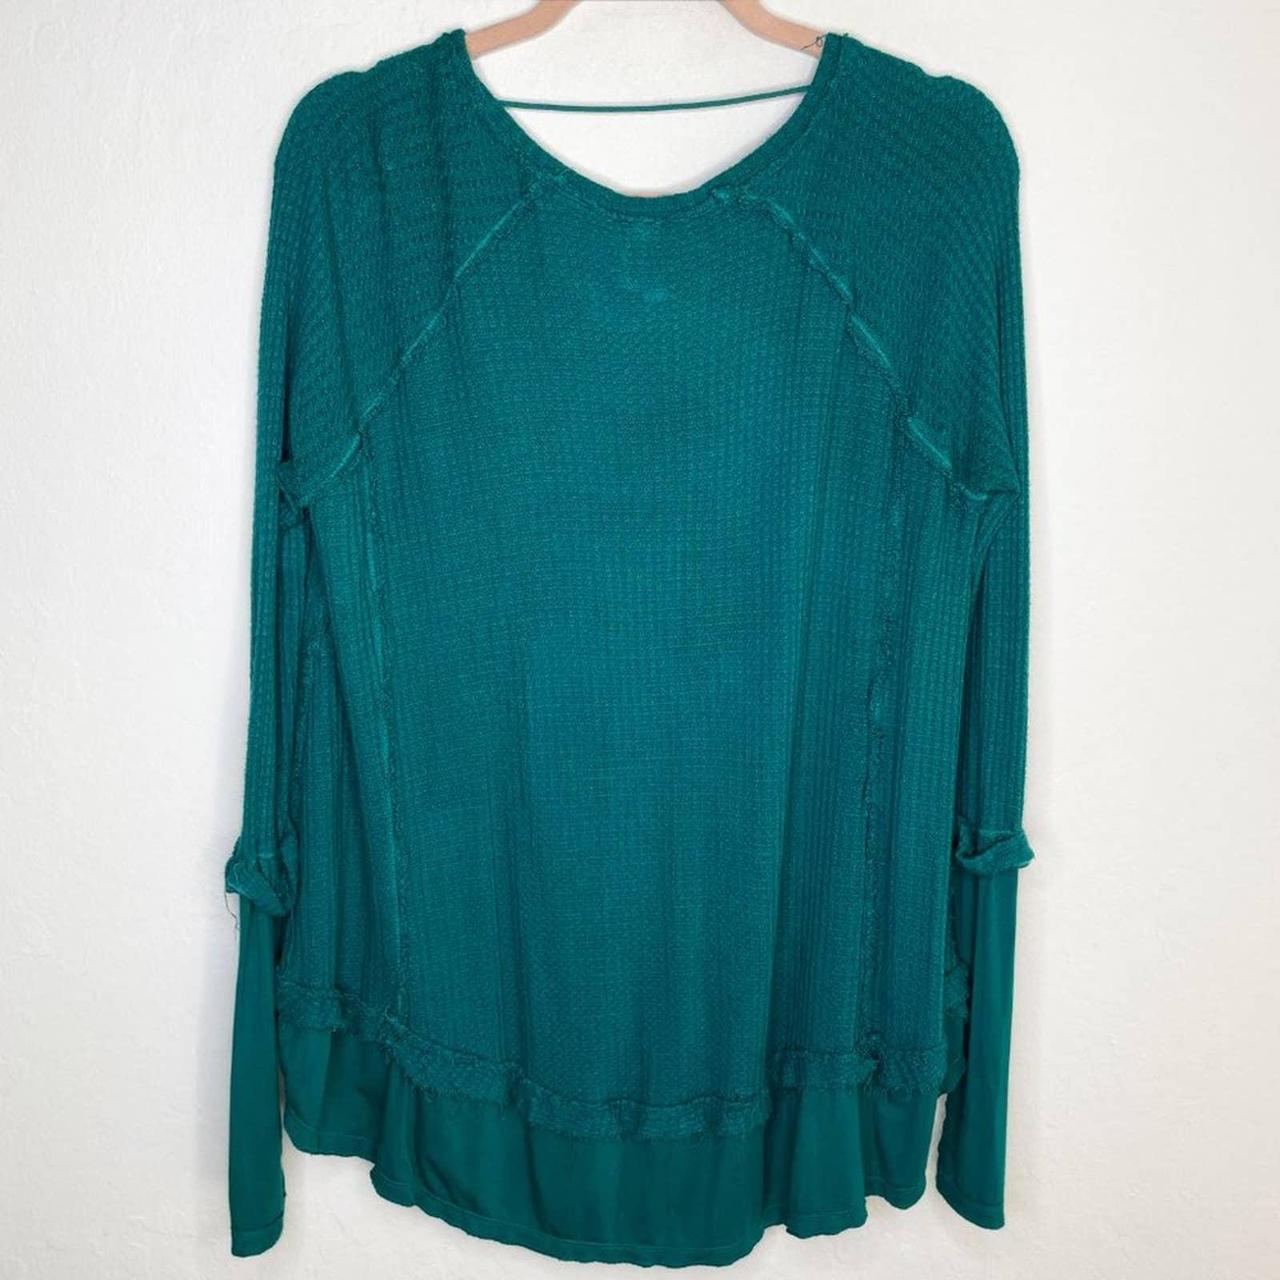 Free People Women's Blue and Green Shirt (2)